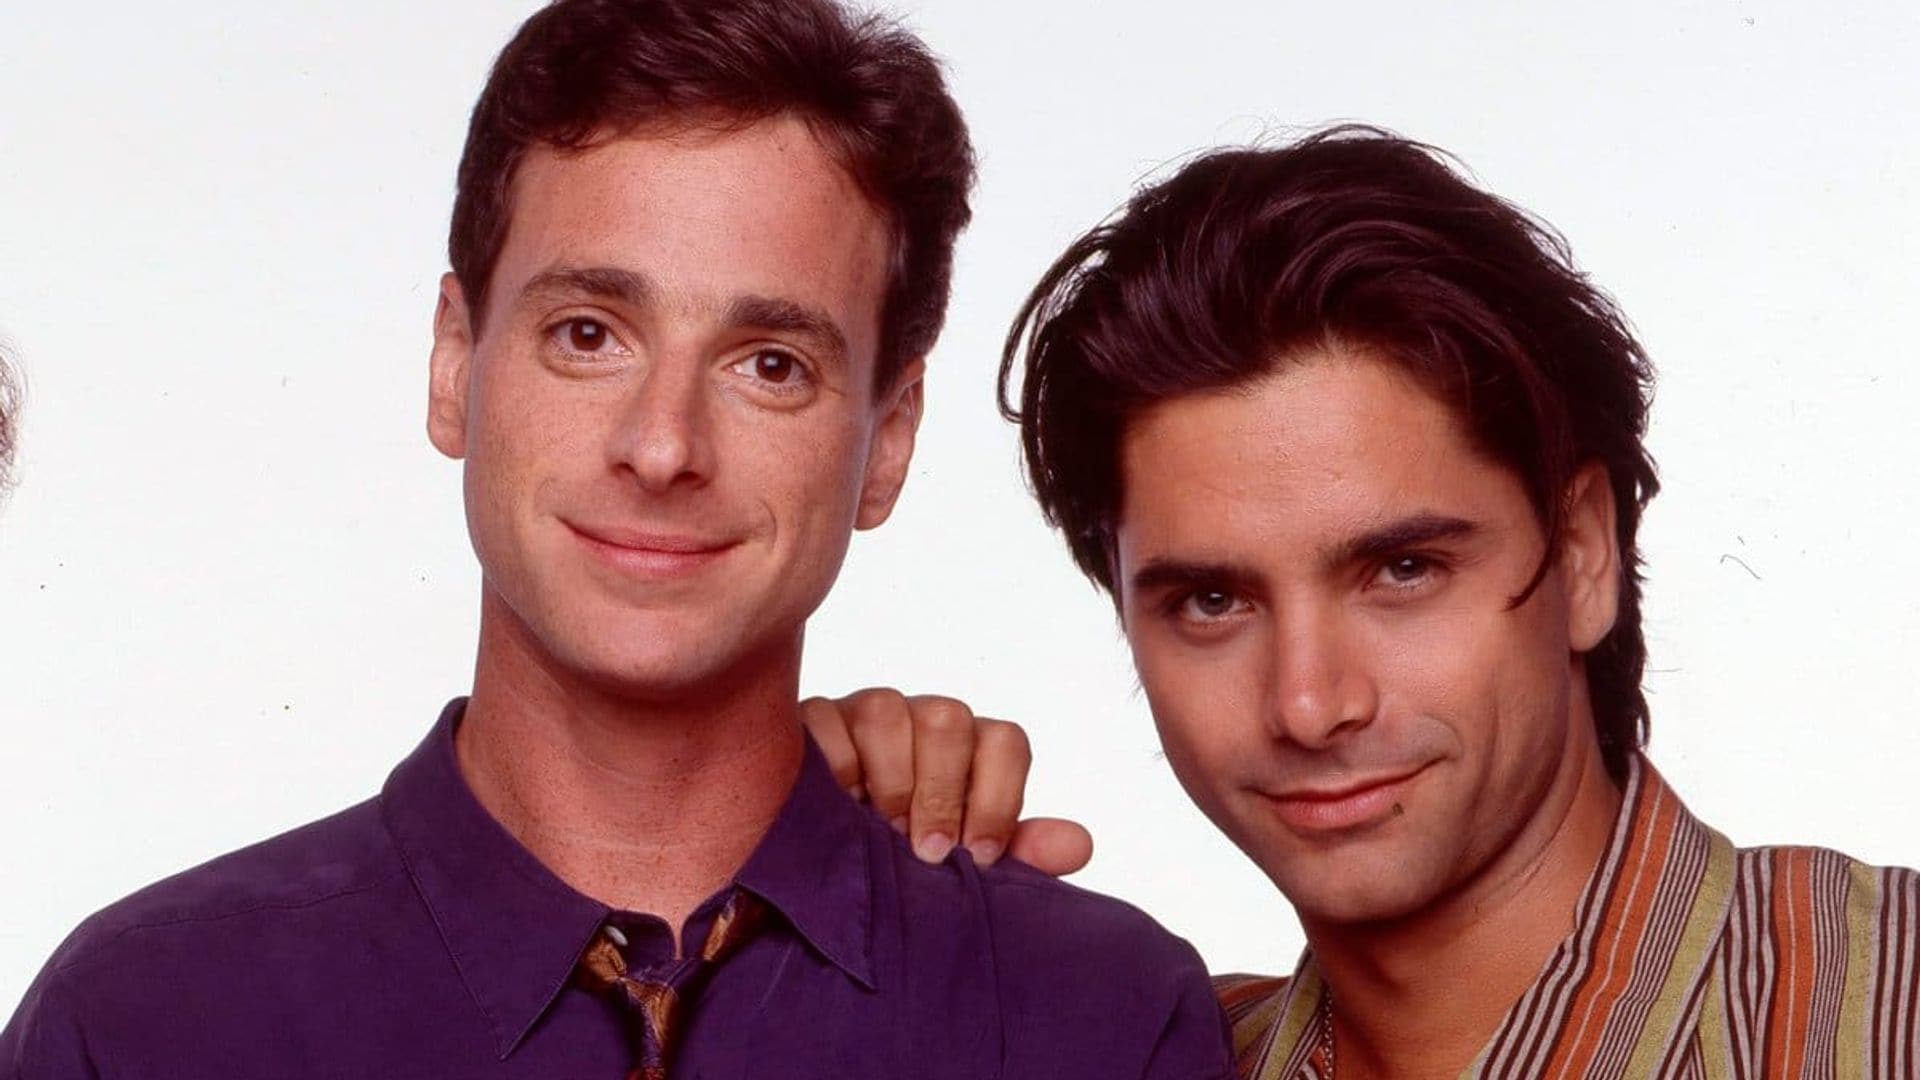 John Stamos says he’s ‘not ready to say goodbye yet’ to friend Bob Saget